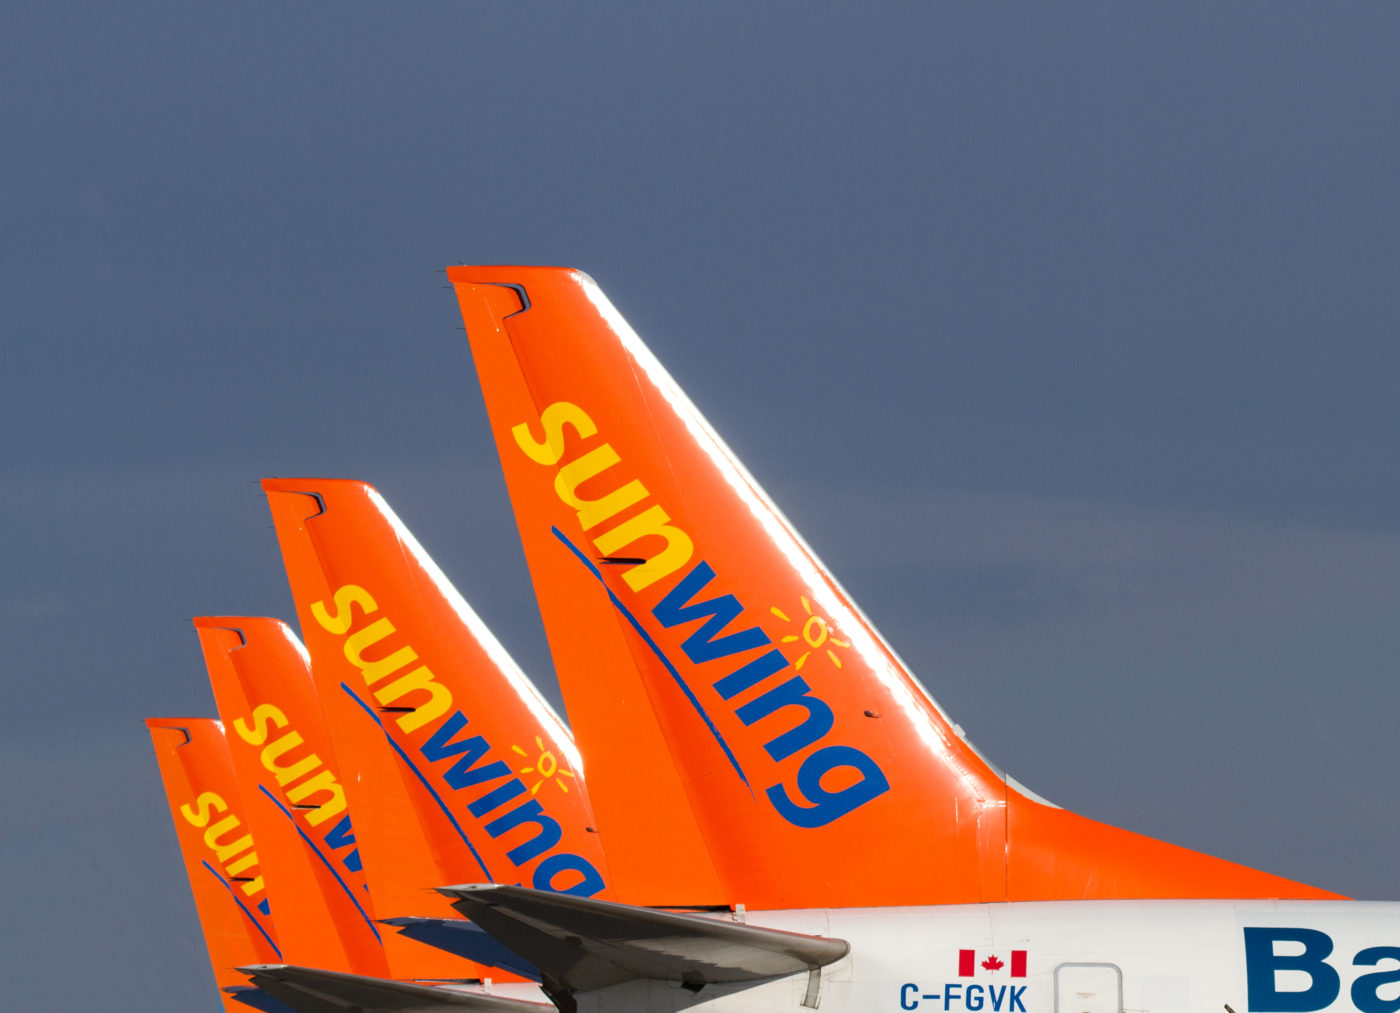 Sunwing finalizes winter schedule to operate without Boeing 737 MAX 8